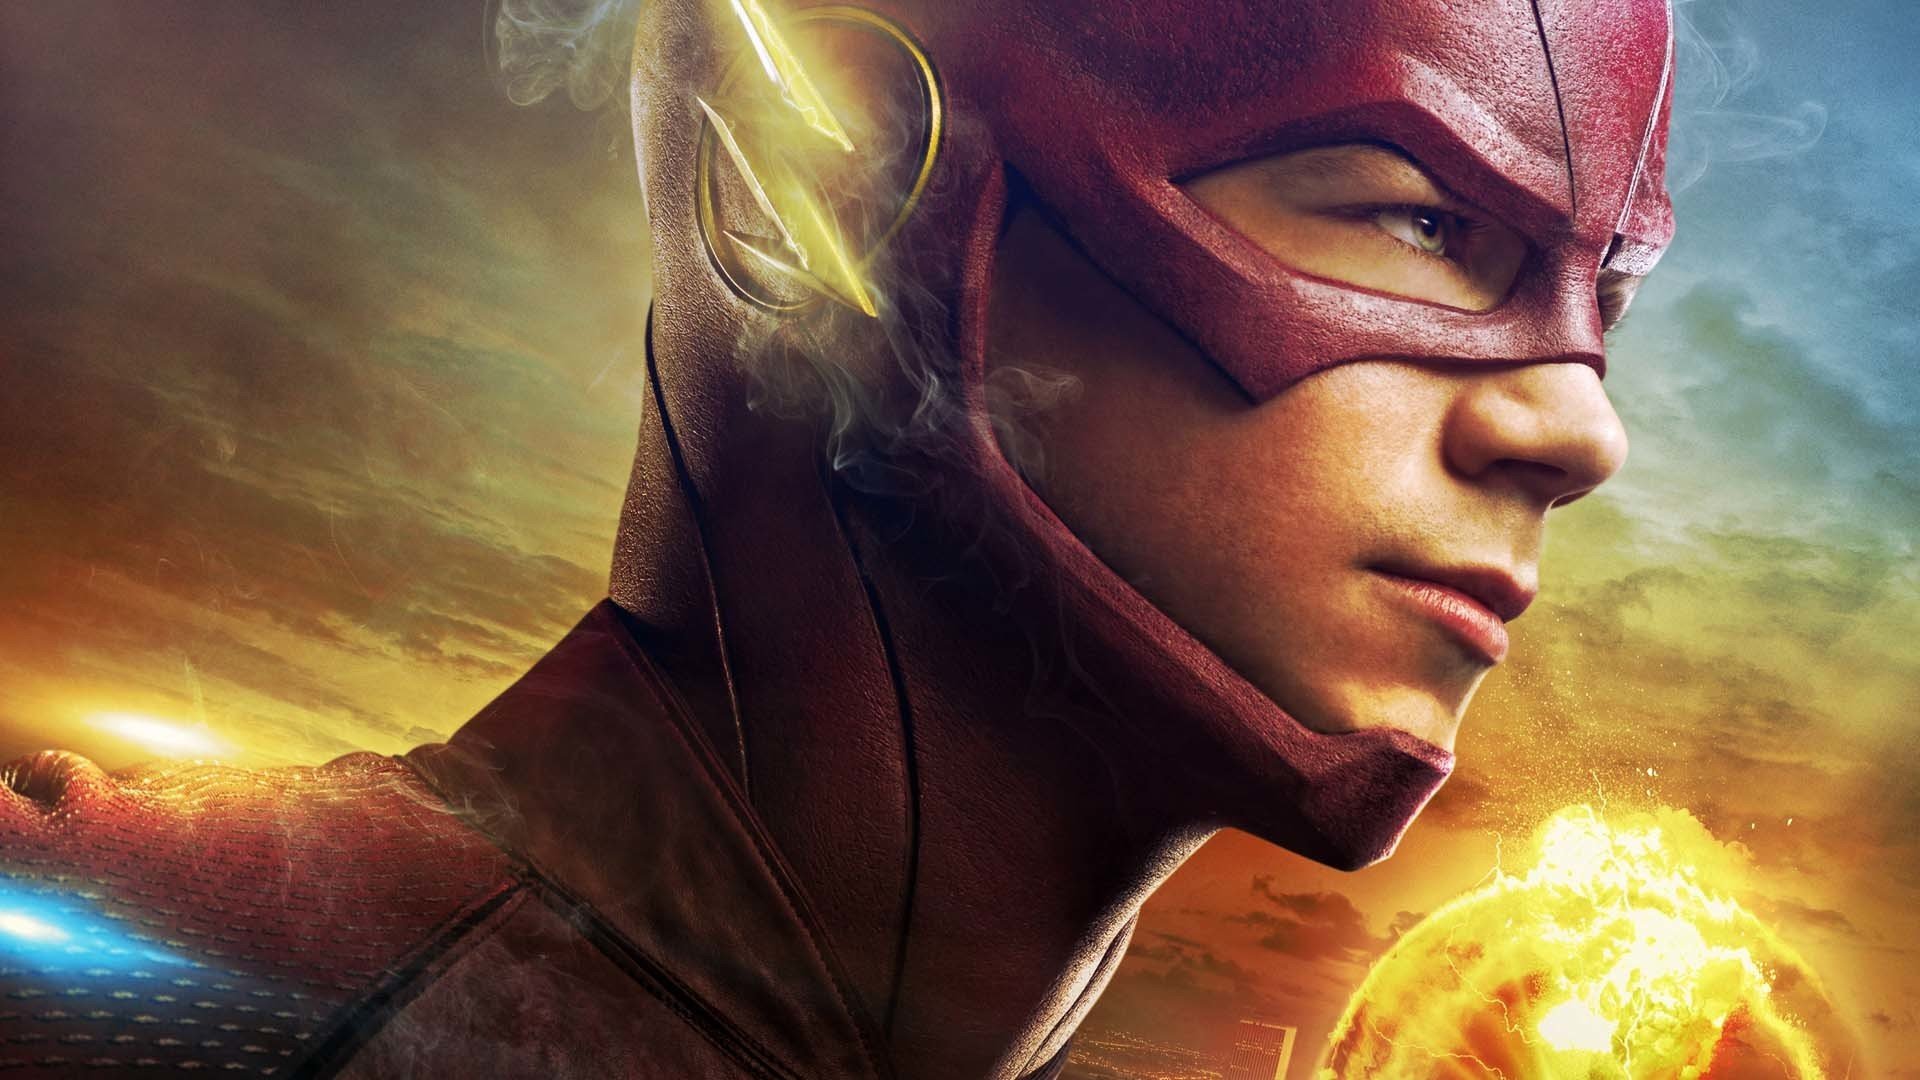 The Flash 2014 Wallpapers Desktop Backgrounds   3   Galaxy Note